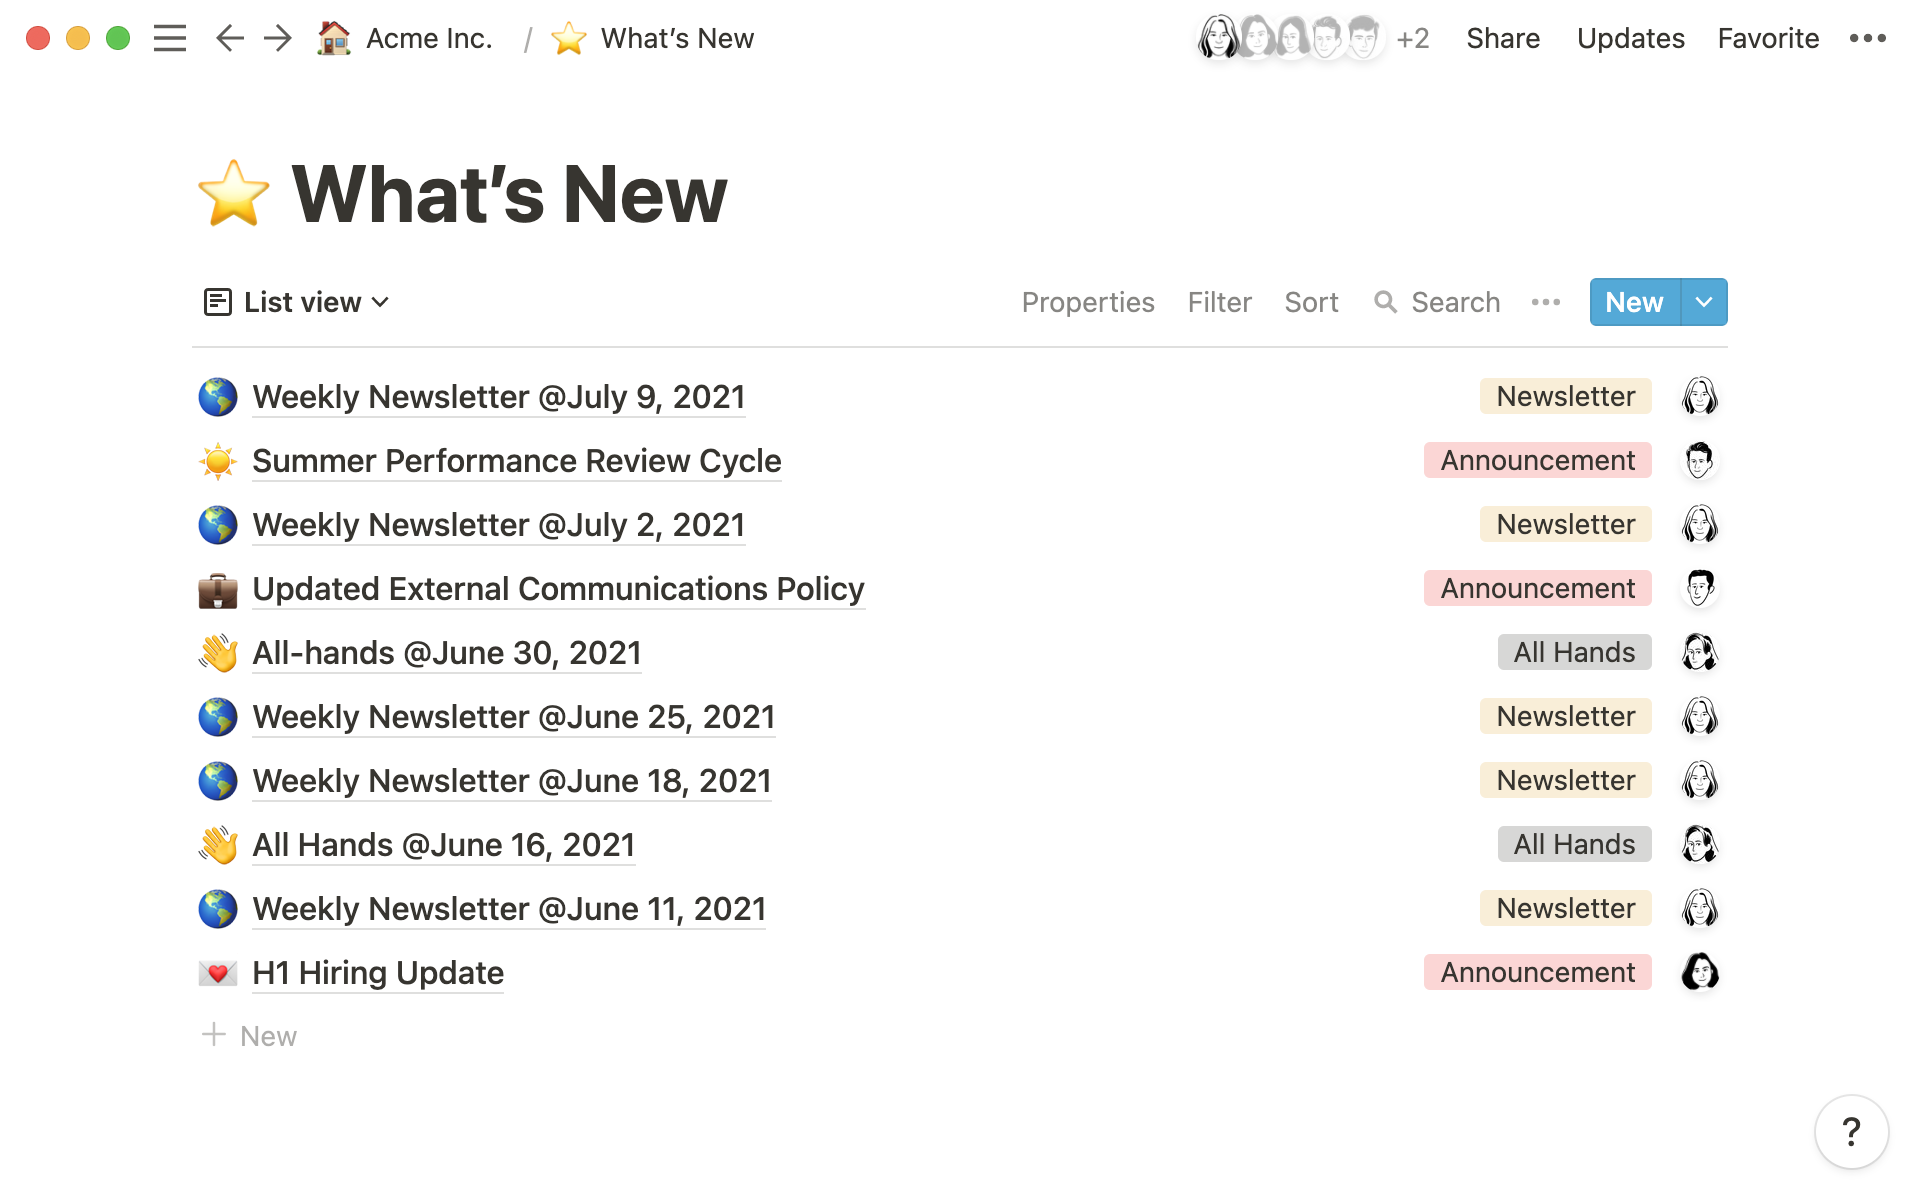 Create a "what's new" database to house important updates like newsletters, memos, and all-hands notes.